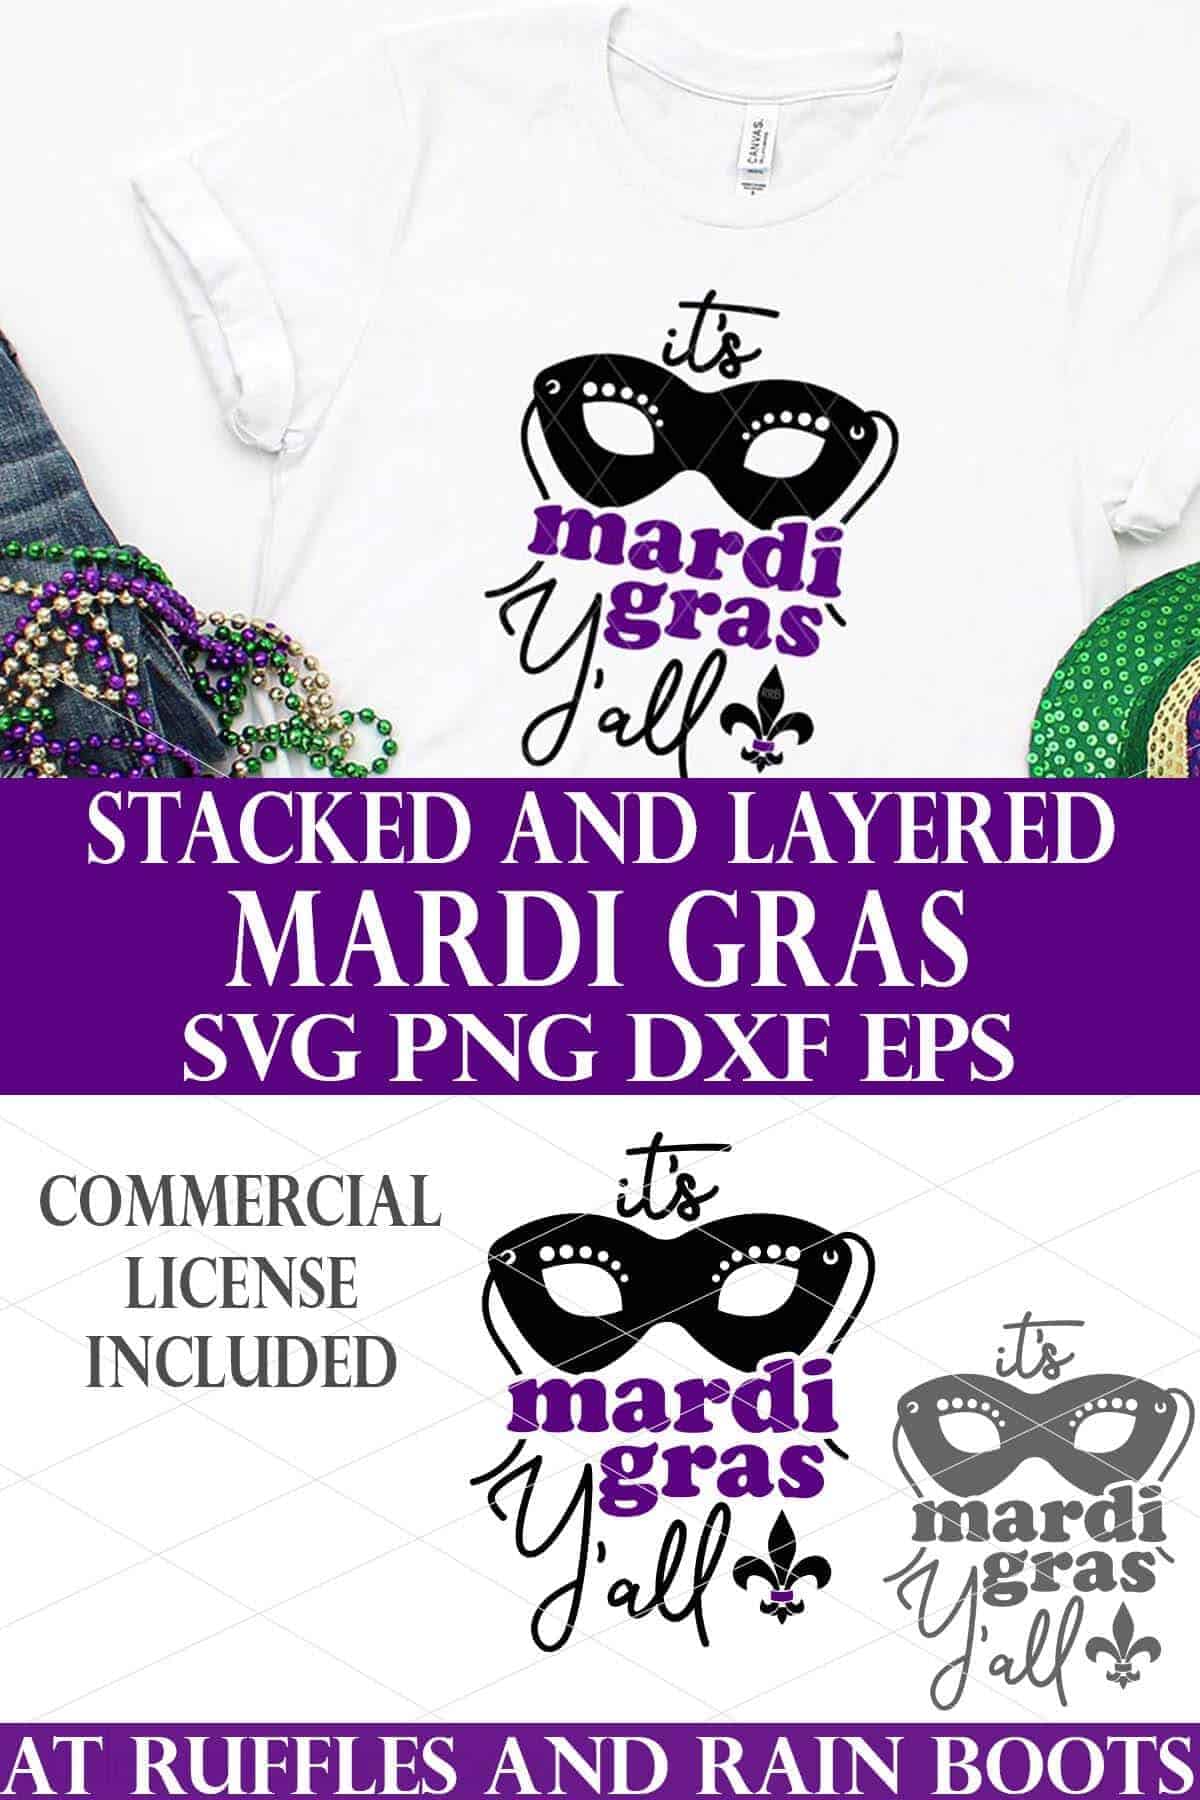 stacked vertical image with black and vinyl mask svg fleur de lis with text which reads its mardi gras yall svg commercial license.